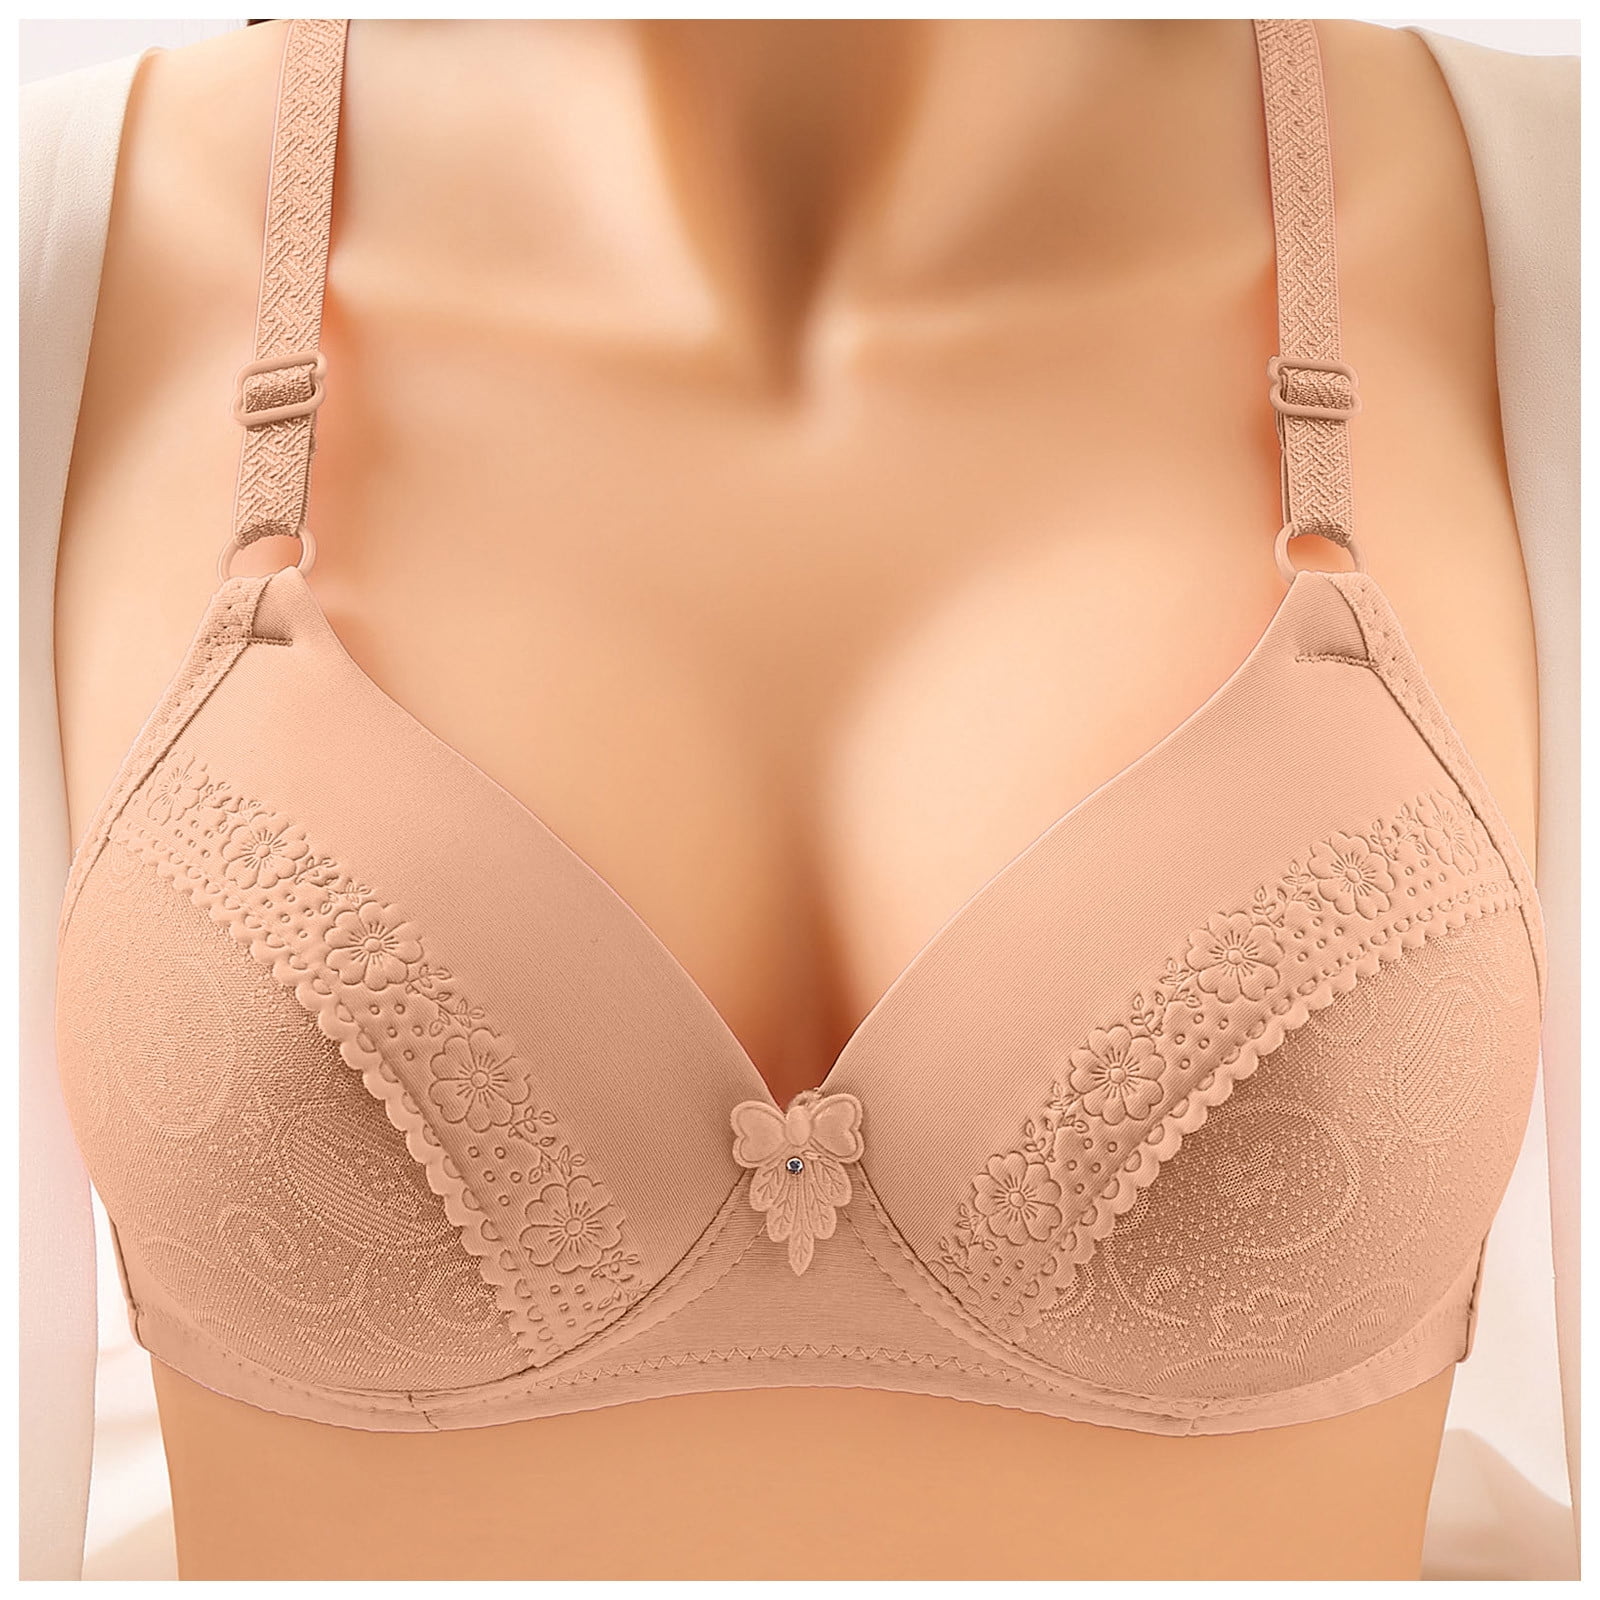 Womens Bras Thin No Steel Ring Small Cup Comfortable Push Up Bra